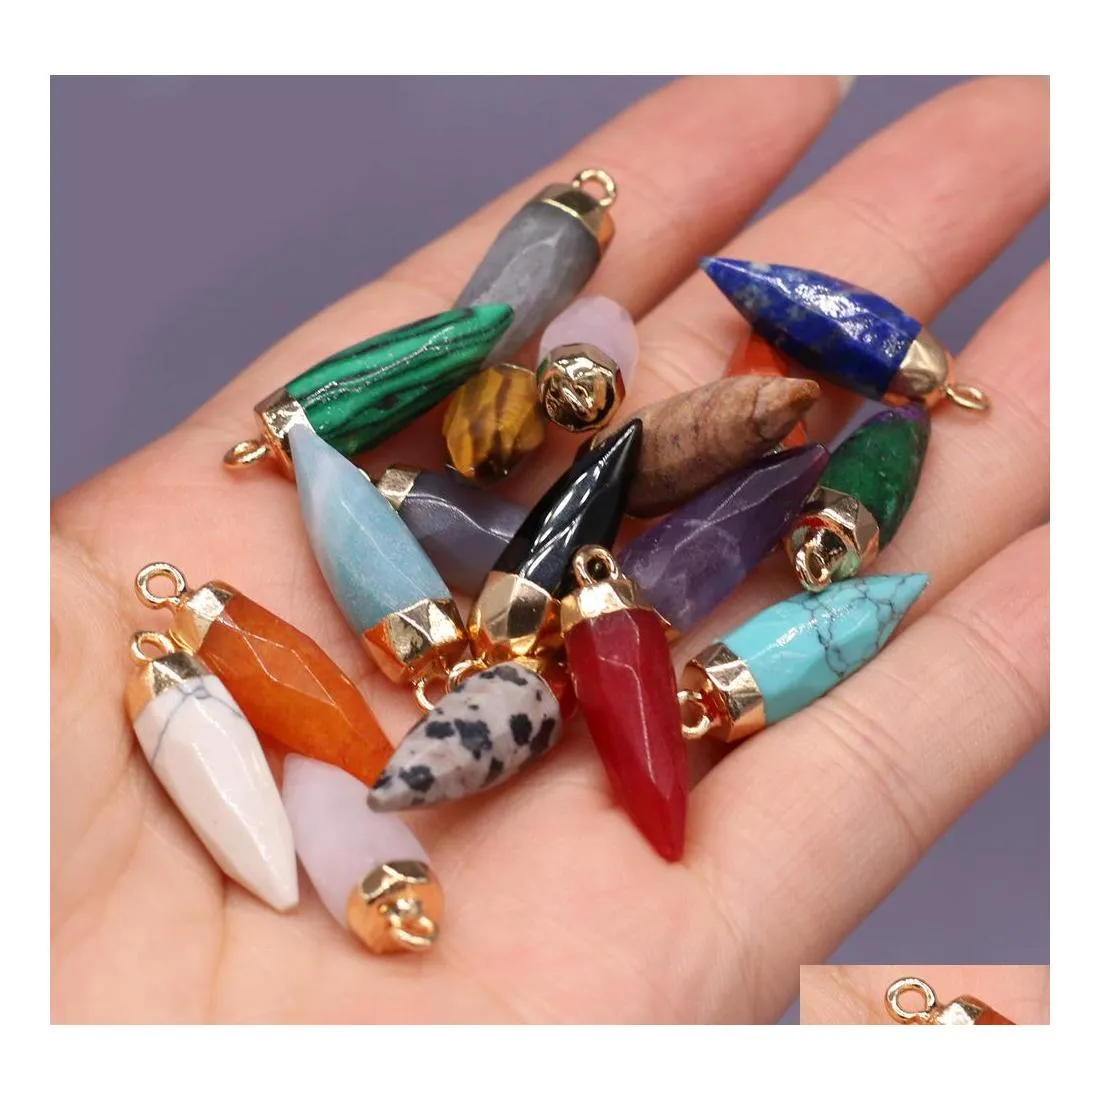 Pendant Necklaces Pendum Chakra Circar Cone Point Healing Crystal Reiki Charms For Necklace Jewelry Making Amethyst Rose Quartz Acc Dha2J